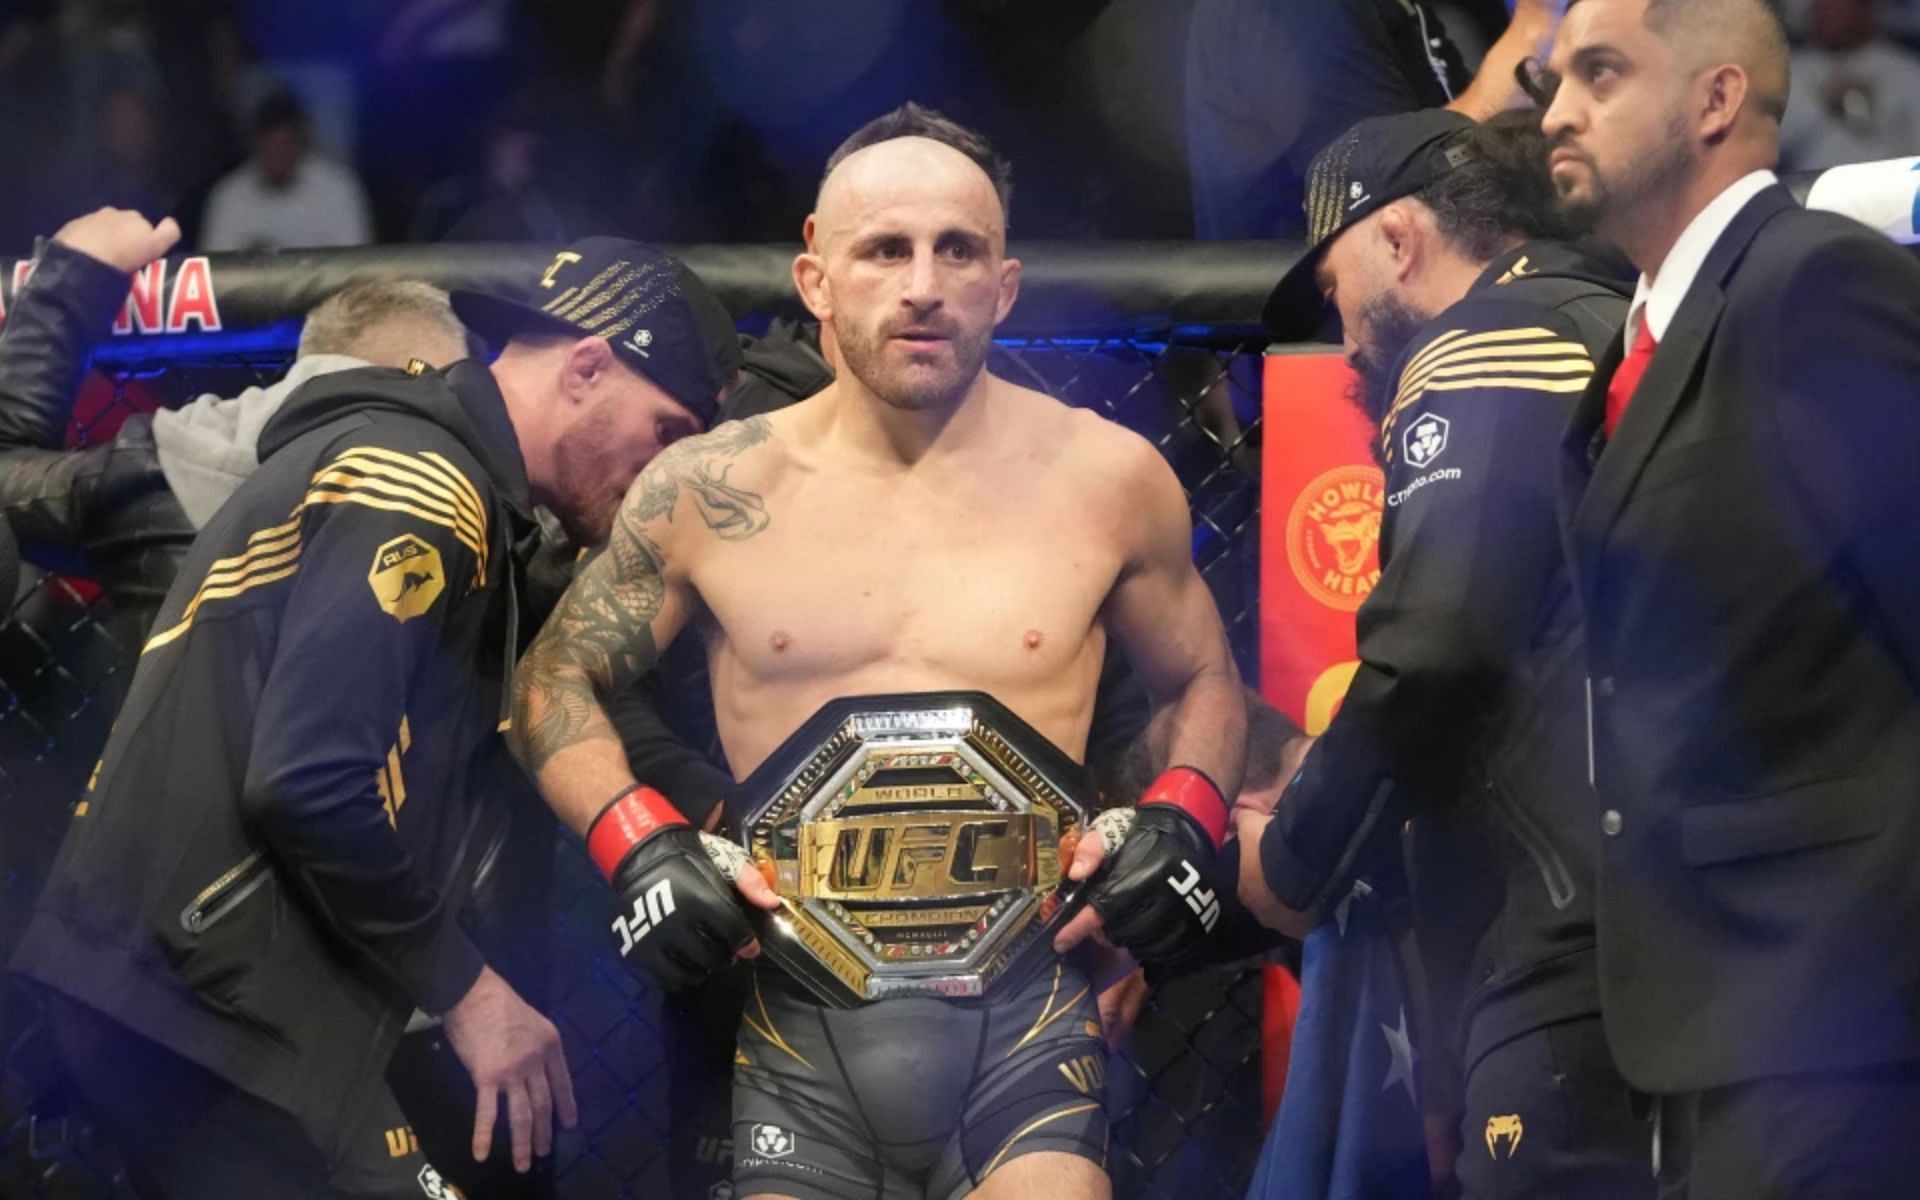 After his third win over Max Holloway, who should be next for Alexander Volkanovski?